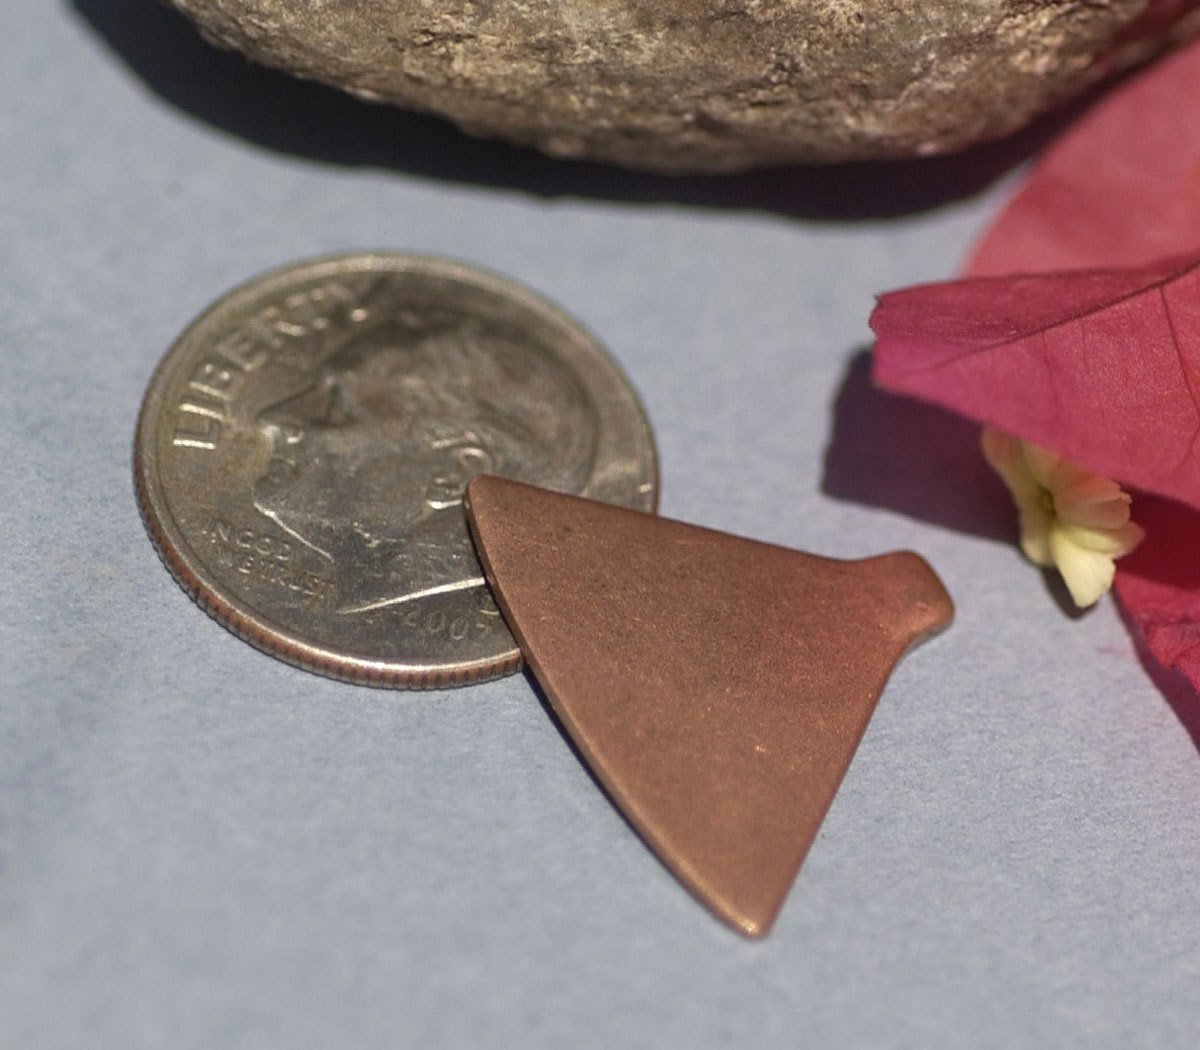 Copper Rounded Triangles Dangles 19mm x 15mm for Enameling Stamping Texturing Soldering Blanks - 6 pieces